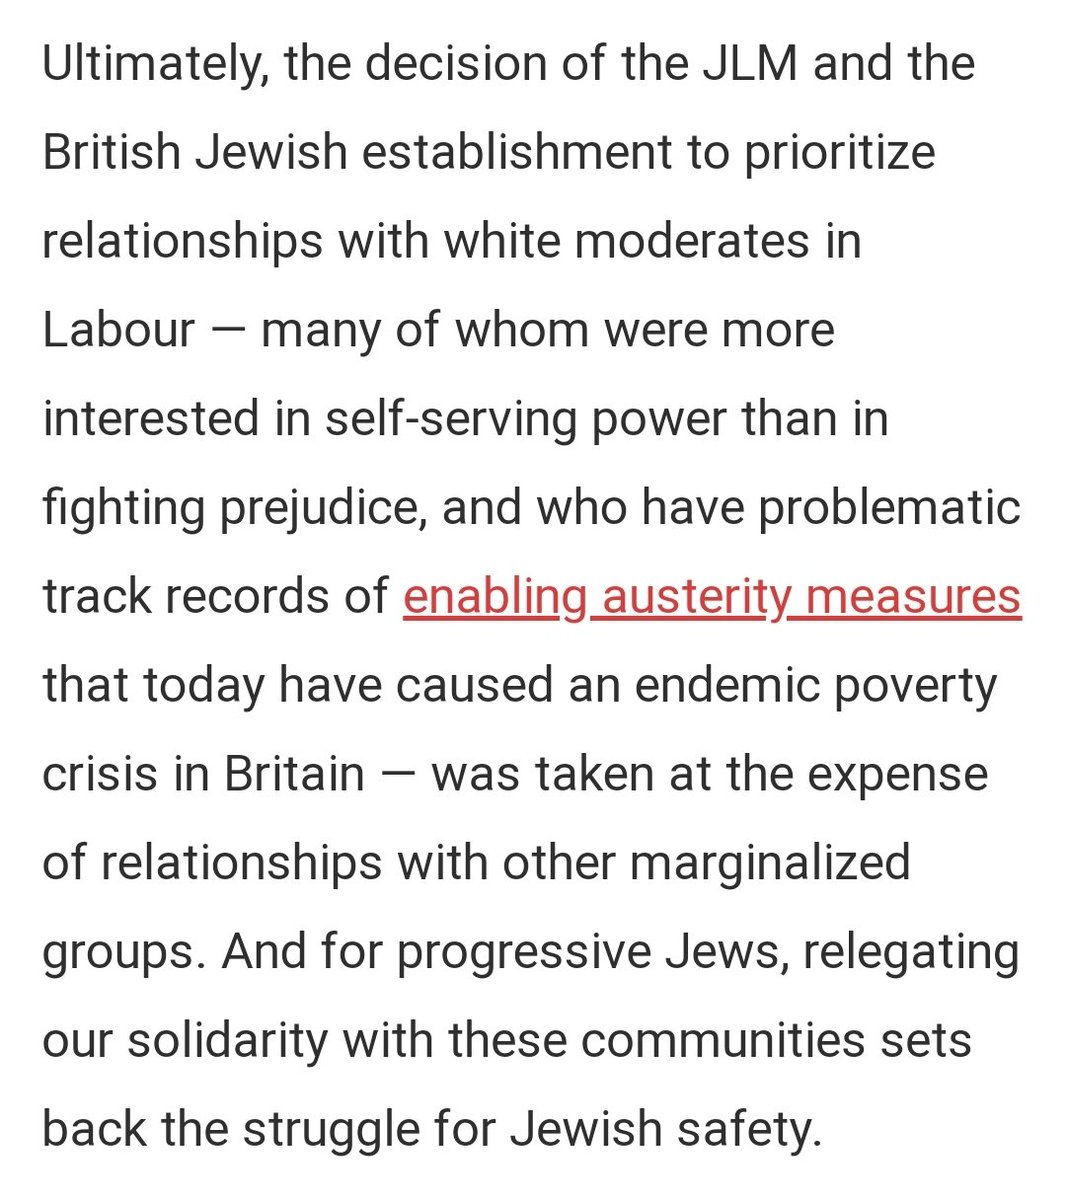 Somehow here, the piece airbrushes put any BAME MP who has supported JLM and who JLM has supported in their own struggles. And there are a number. That JLM do not shout about this, often out of respect to the MP or member. Solidarity shouldn't be factional.